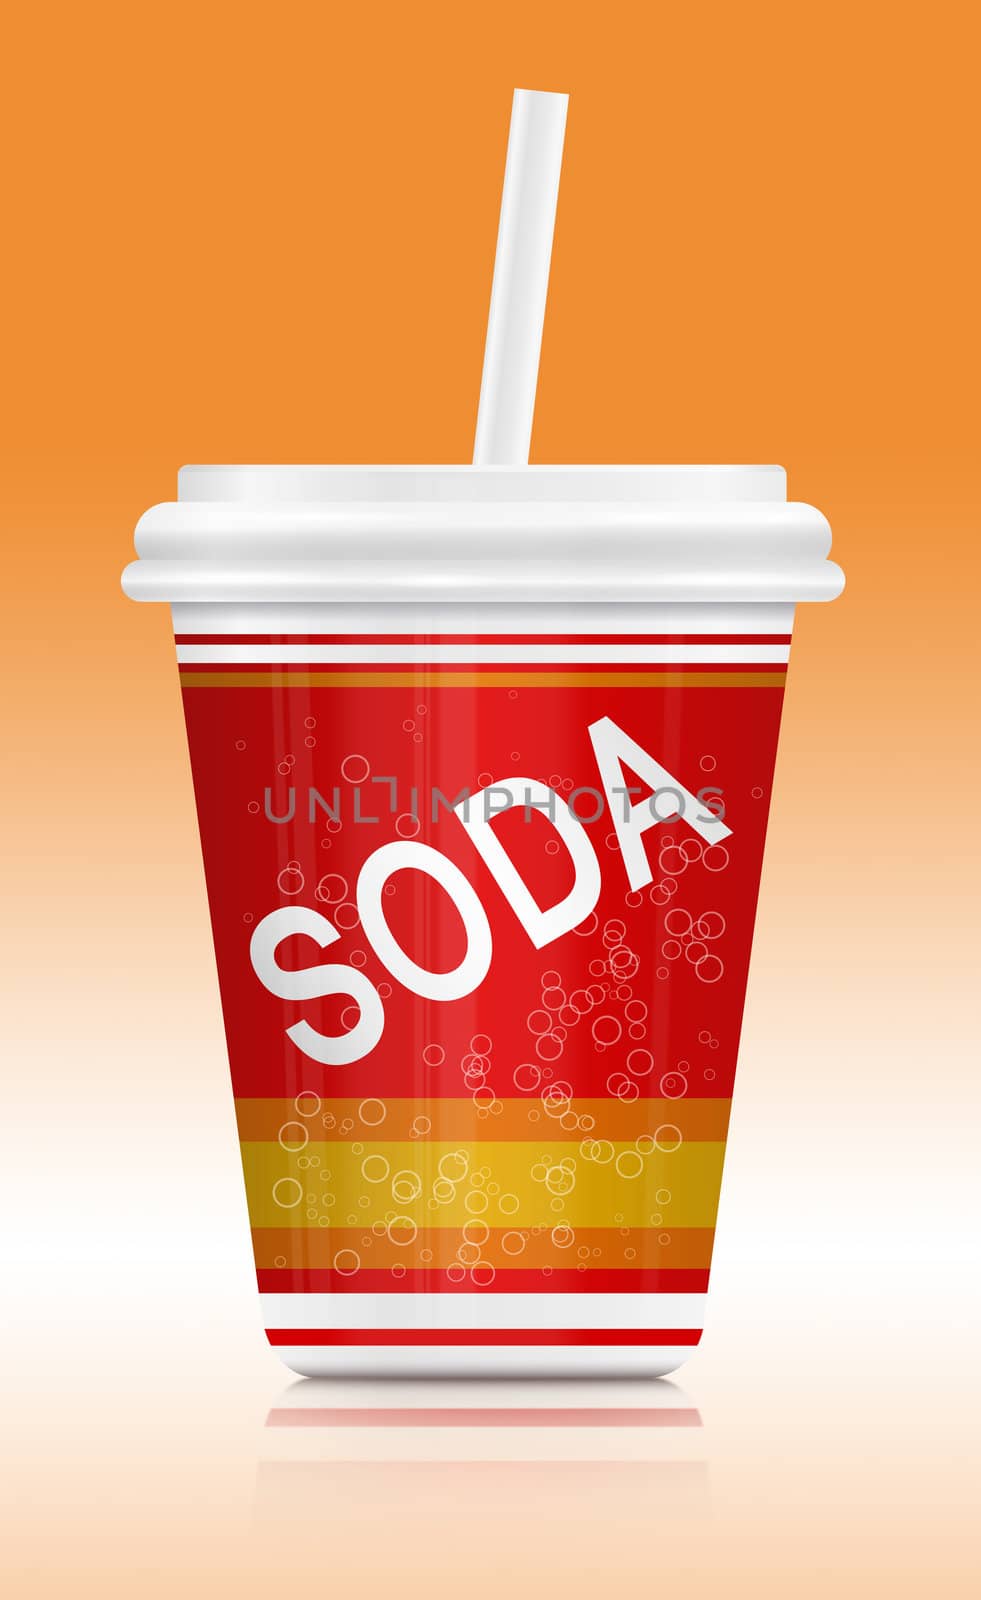 Illustration depicting a fast food soda drink container. Arranged over orange to white gradient.